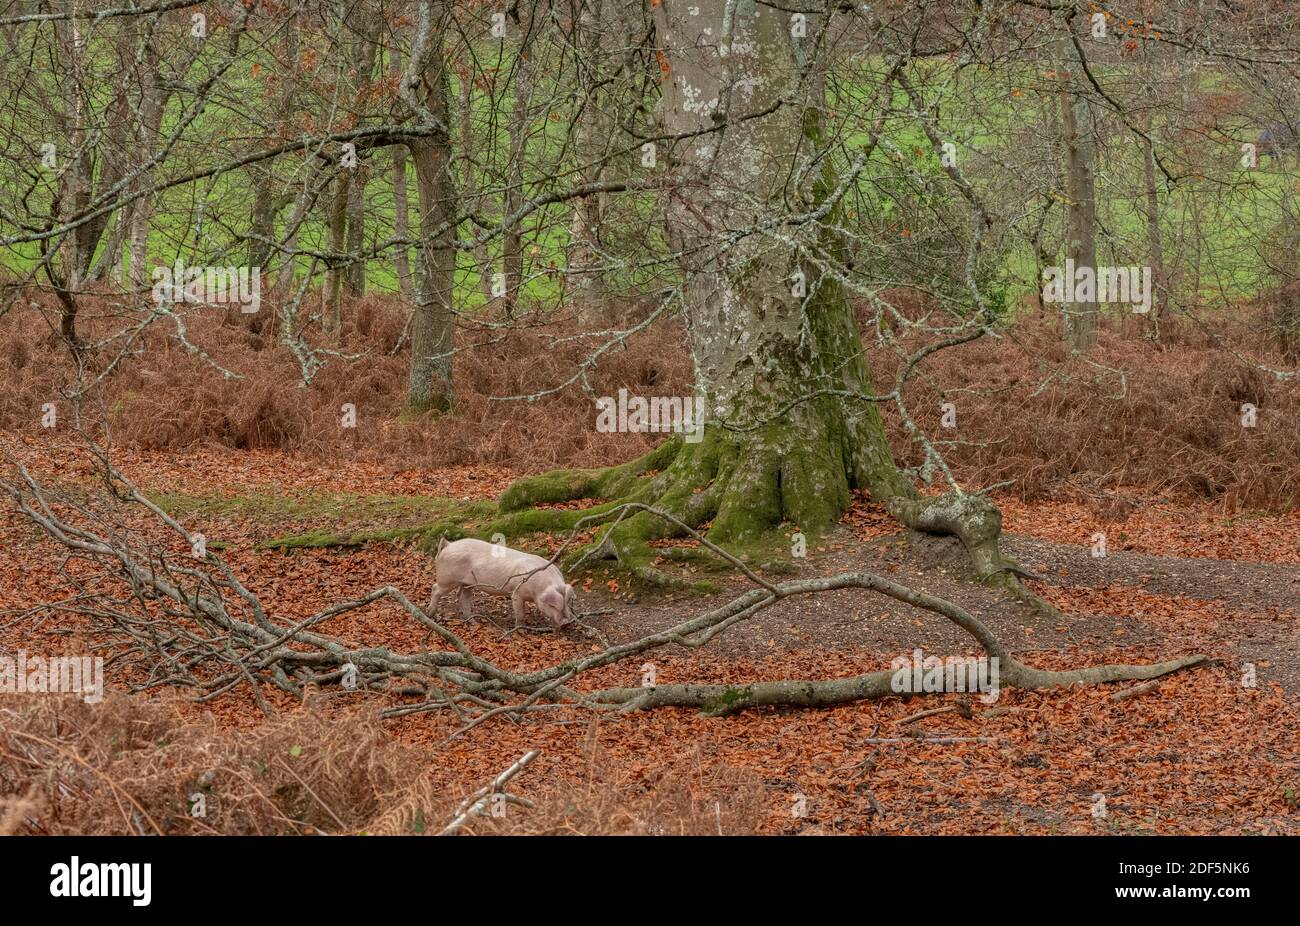 Large White pig in open woodland along the Dockens Water, at Moyles Court. New Forest. Stock Photo